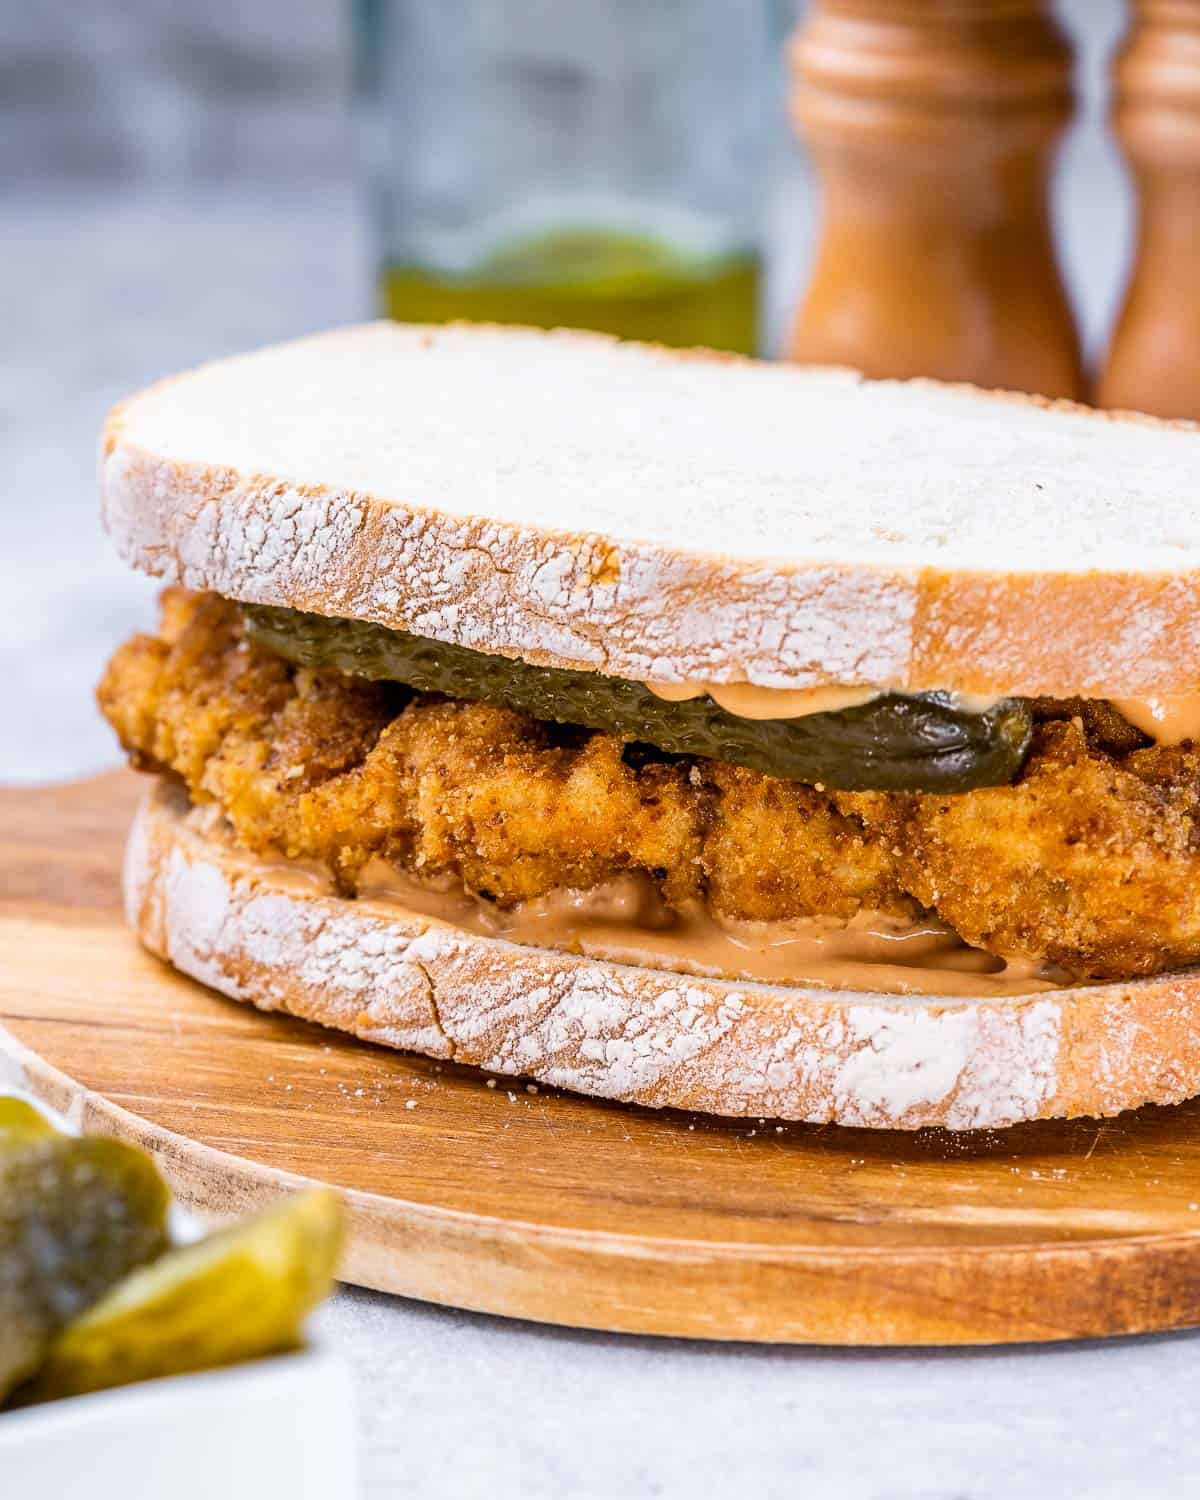 Crispy chicken served on toasted bread with pickles.